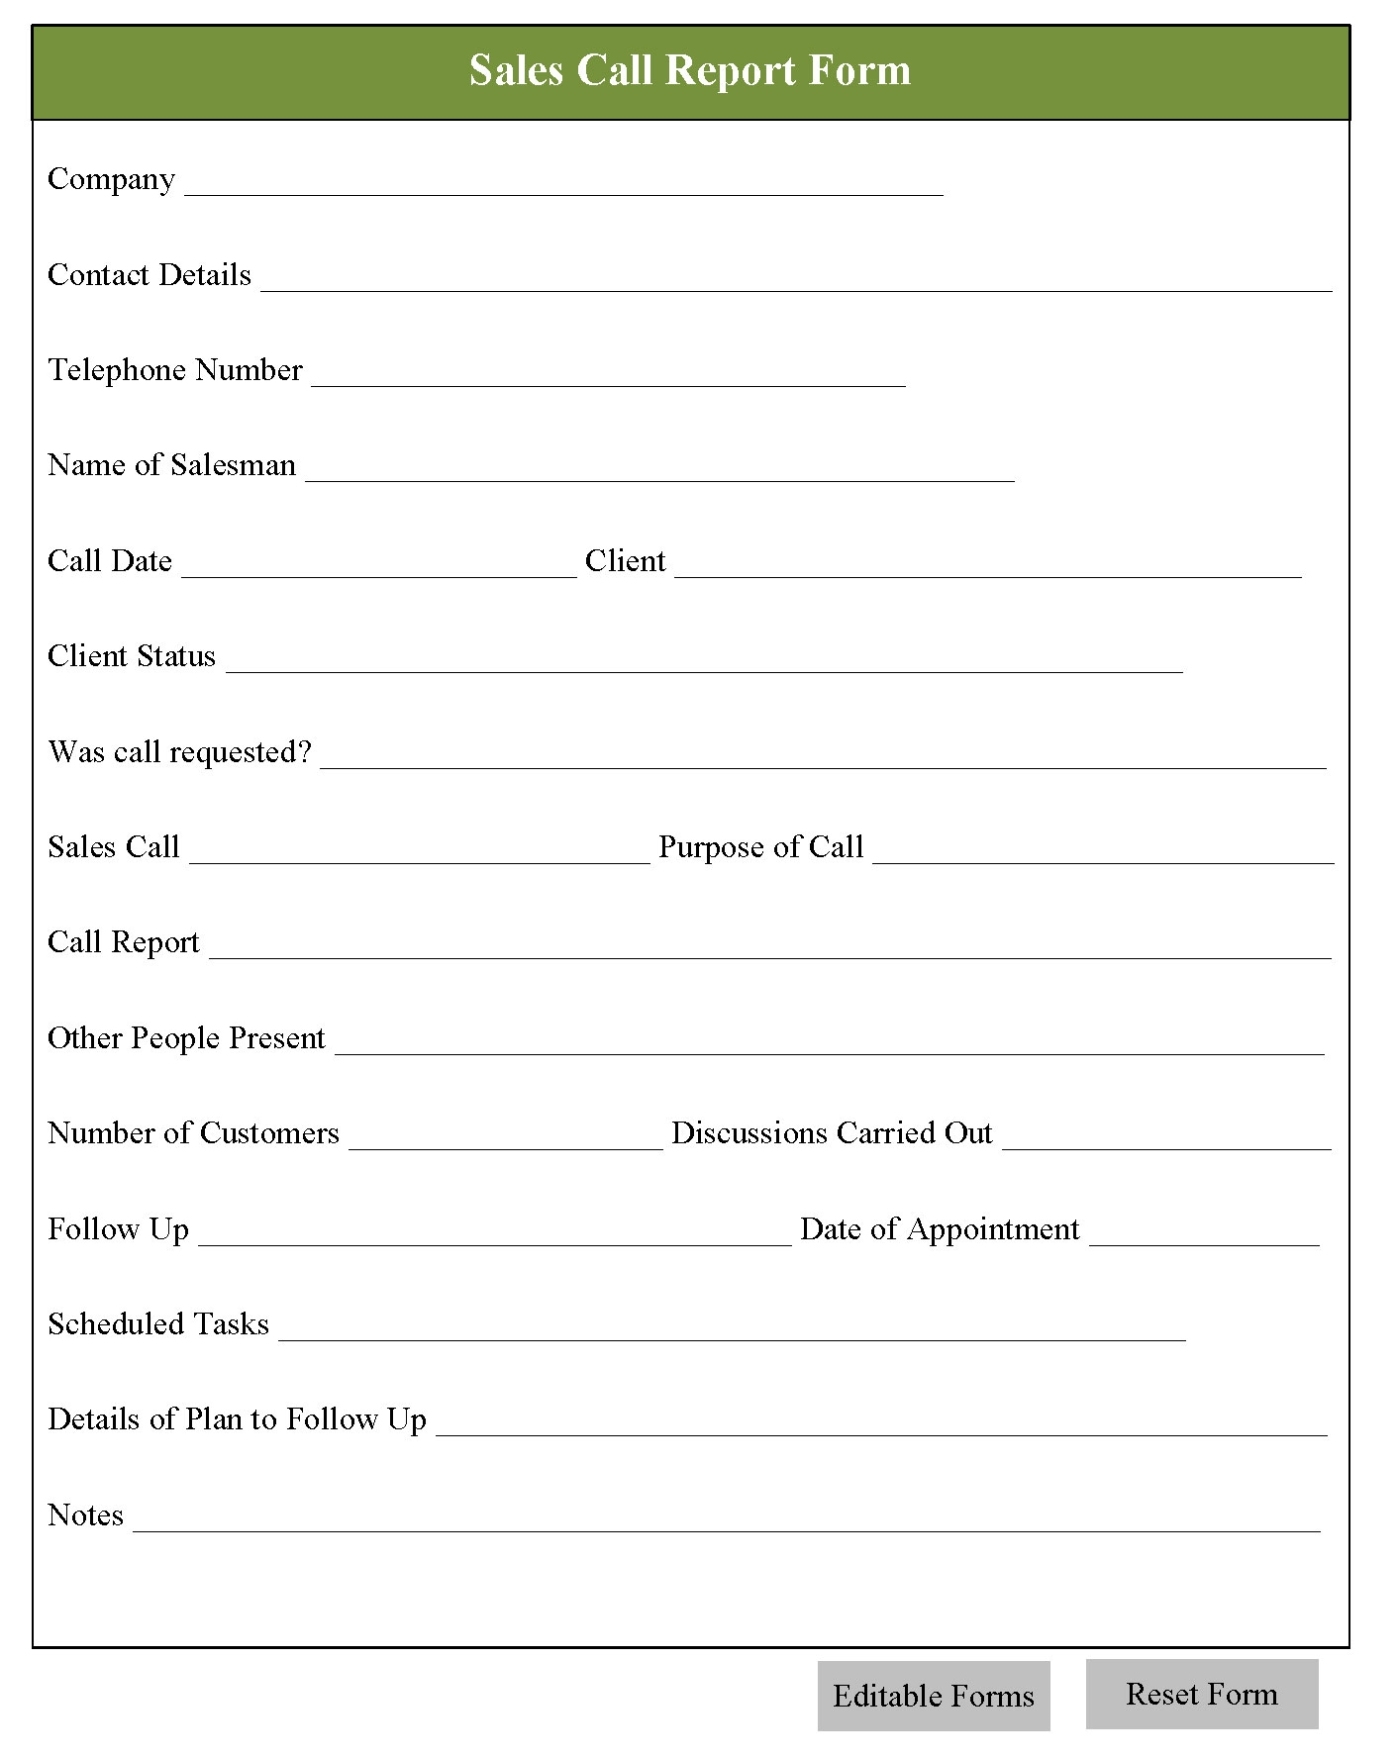 Sales Call Report Form - Editable Forms Inside Daily Sales Call Report Template Free Download